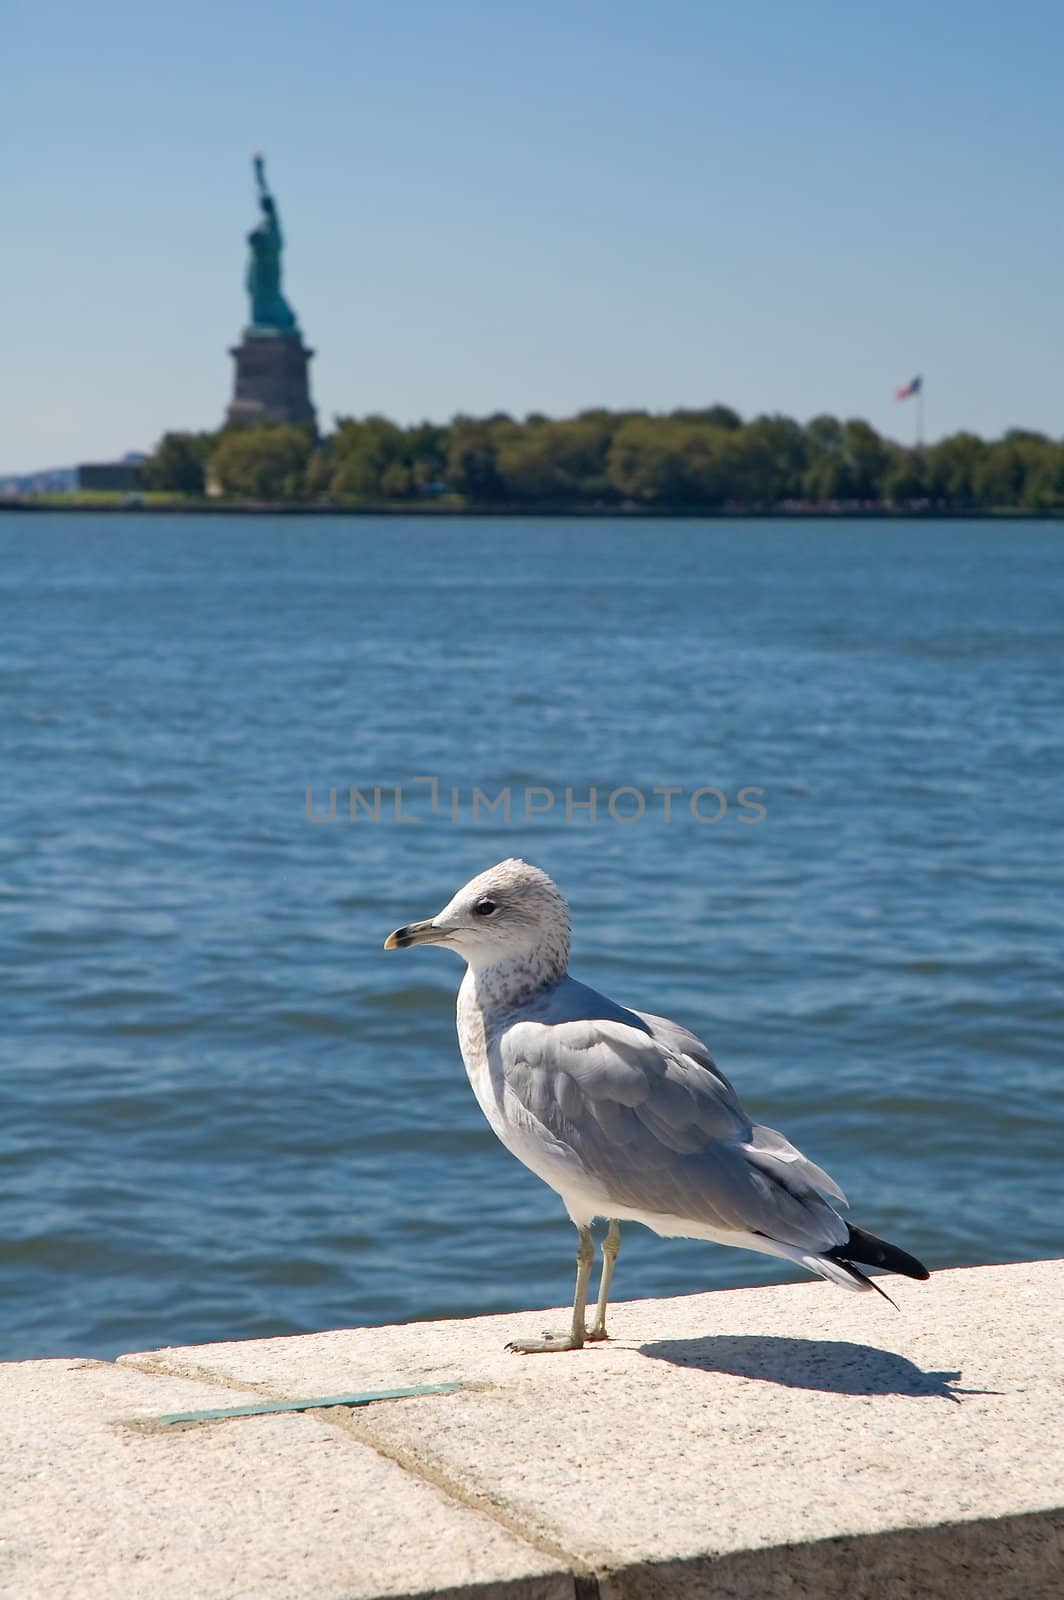 sea gull and statue of liberty by rorem